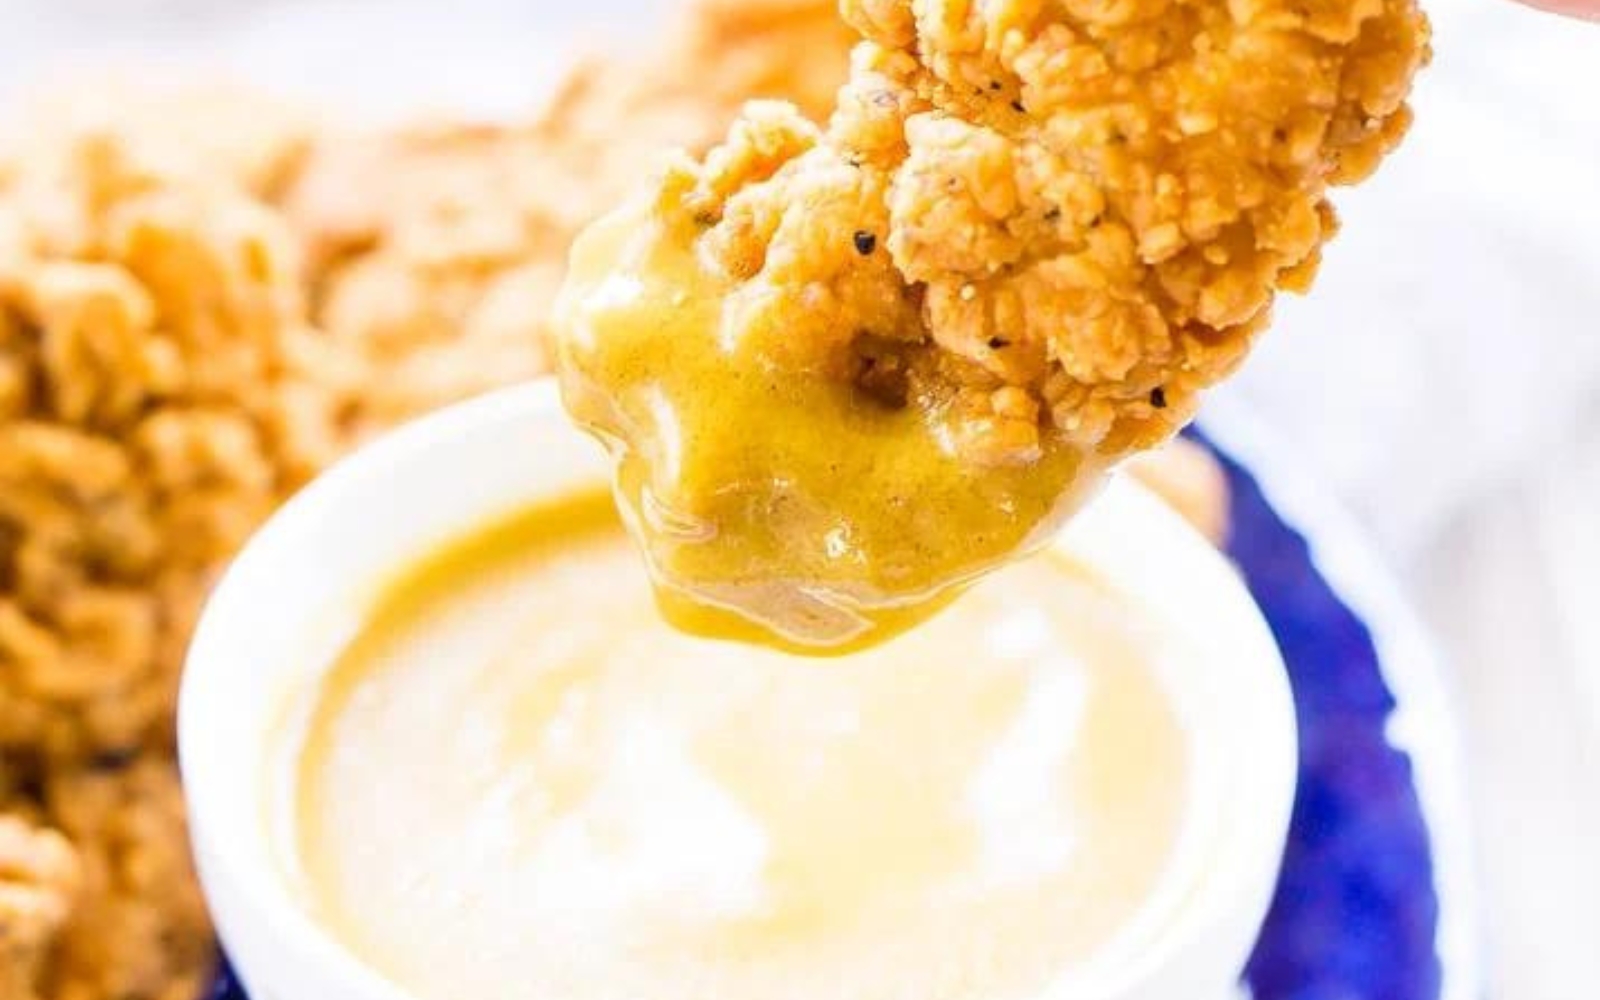 crispy chicken being dipped into maple mustard sauce